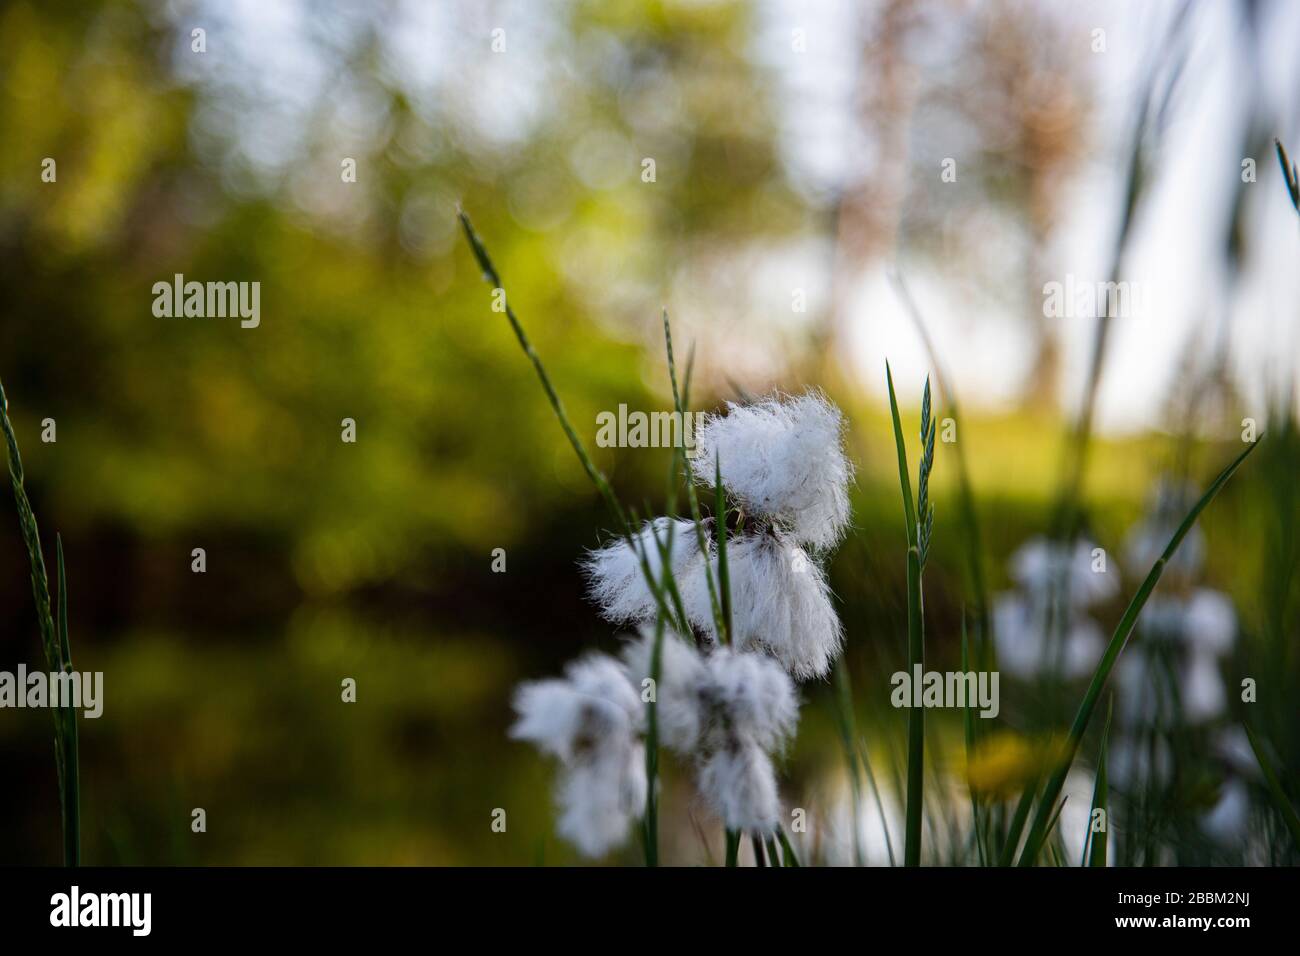 Grass blooming near water pond, white blossom, fluffy light in evening light, surrounded by green grass. Stock Photo